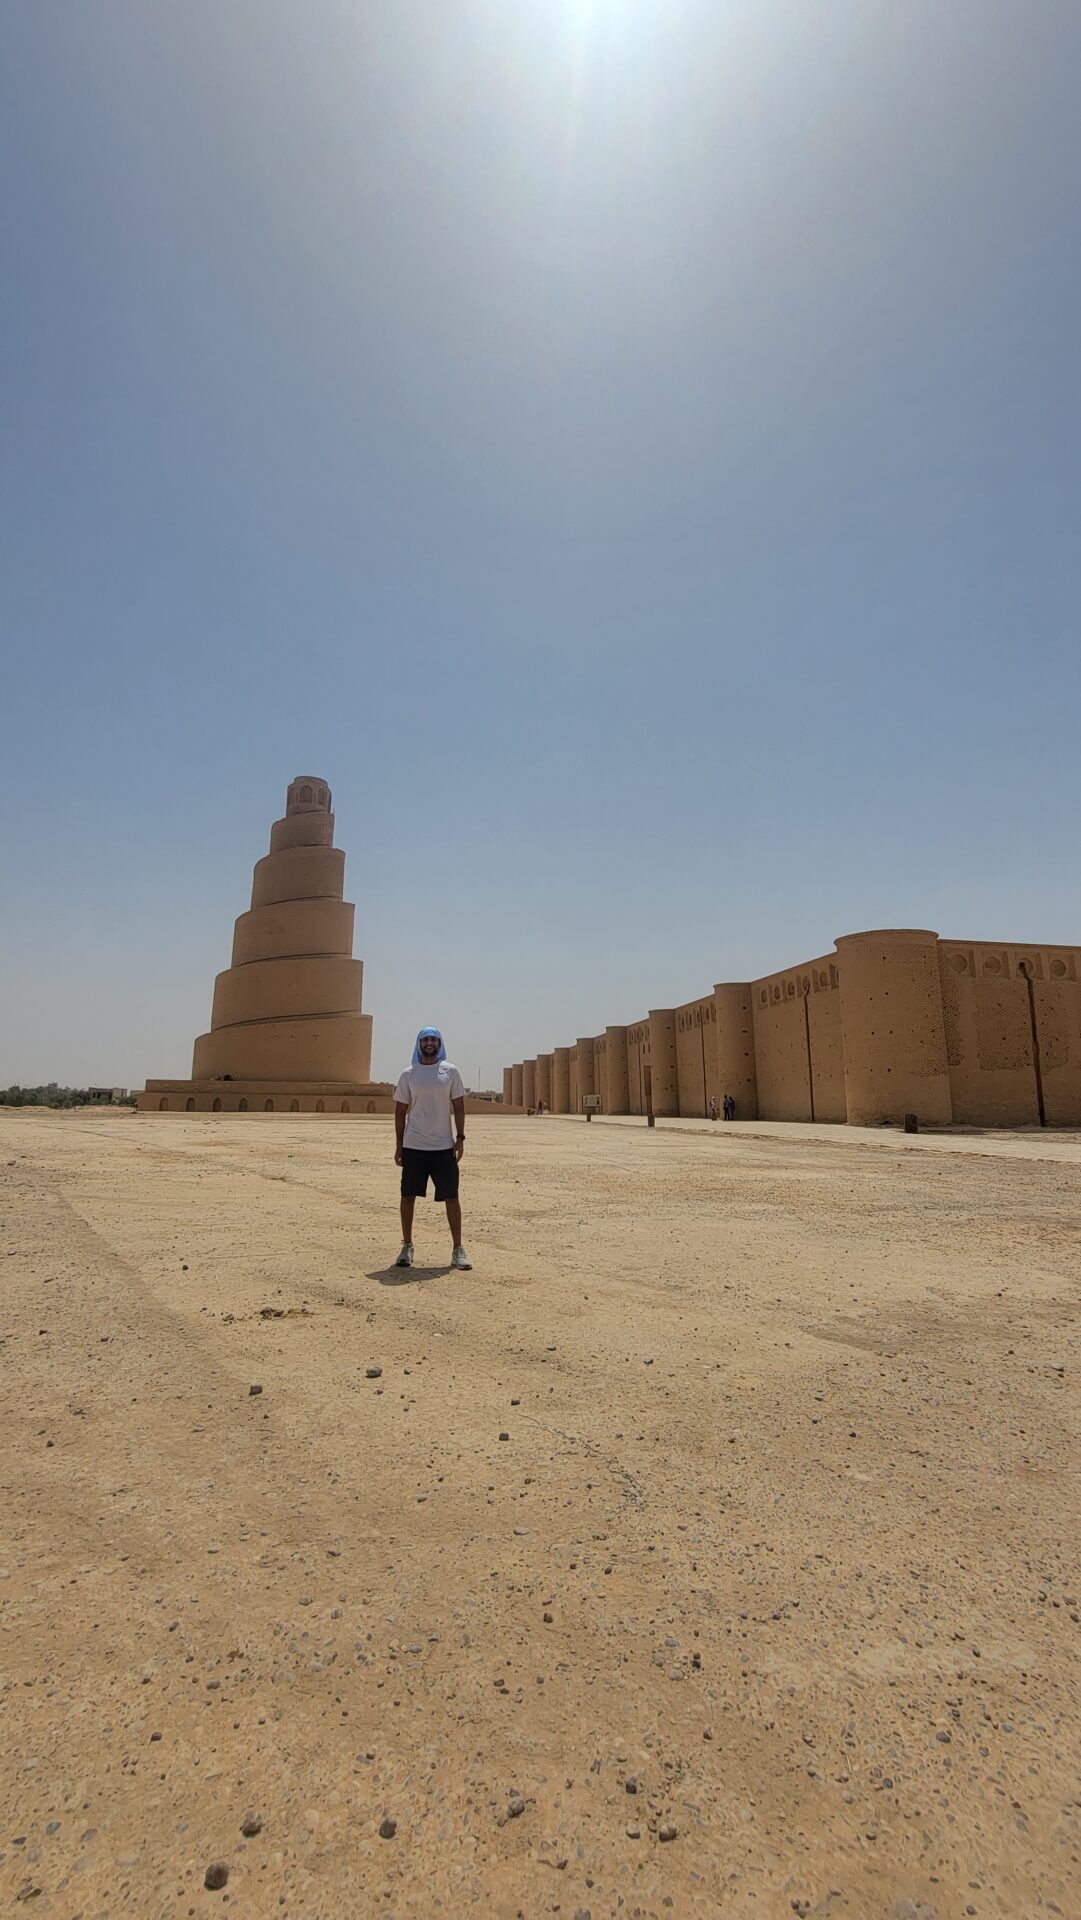 a man standing in a desert with a tall tower